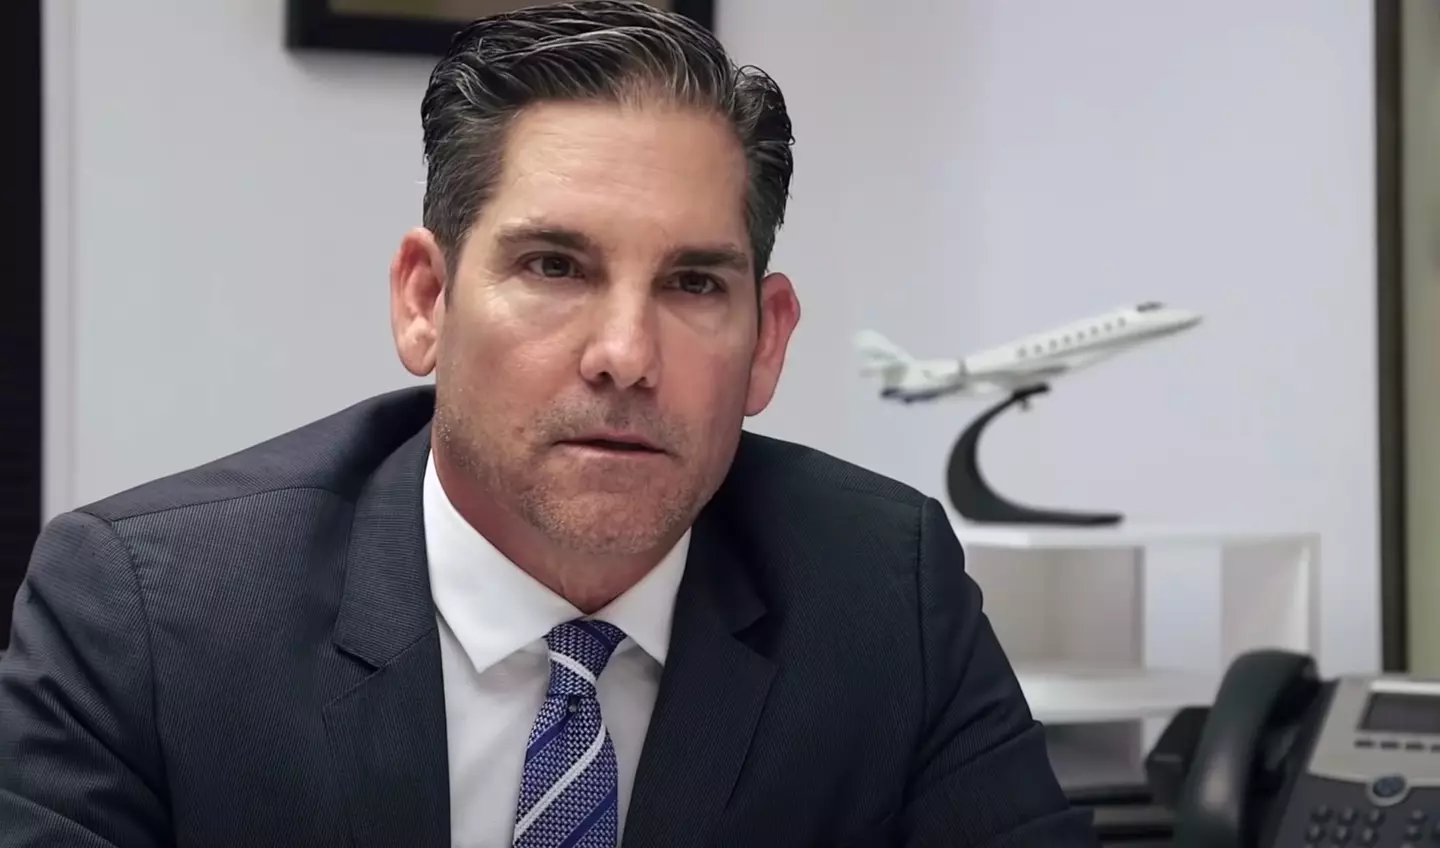 Grant Cardone wasn't taking any prisoners in the job interview.